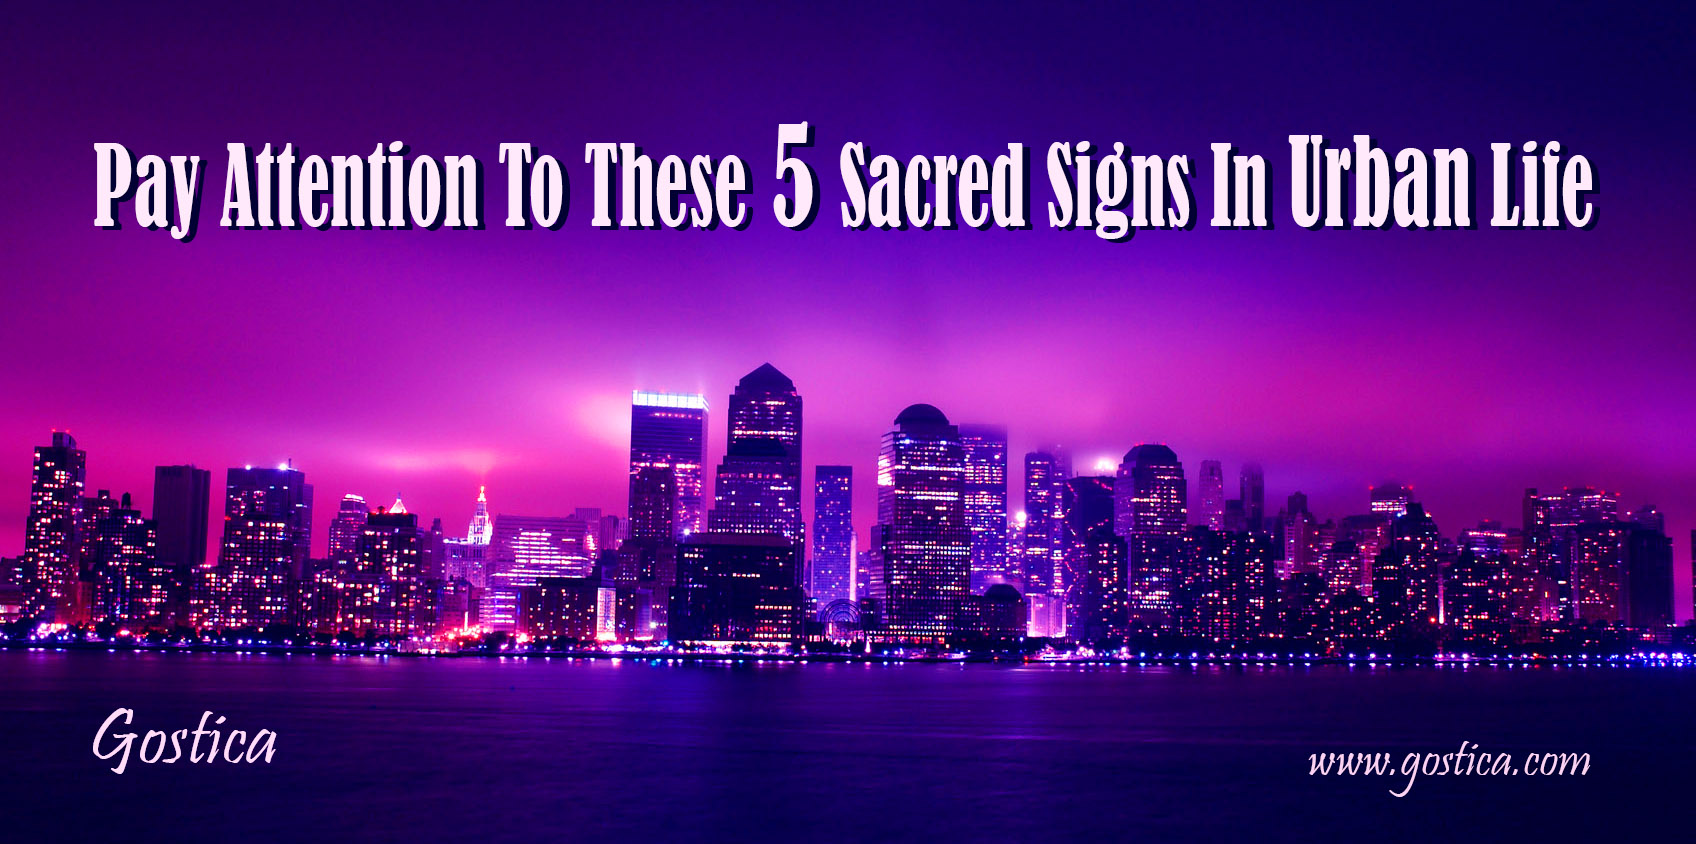 Pay-Attention-To-These-5-Sacred-Signs-In-Urban-Life-.jpg